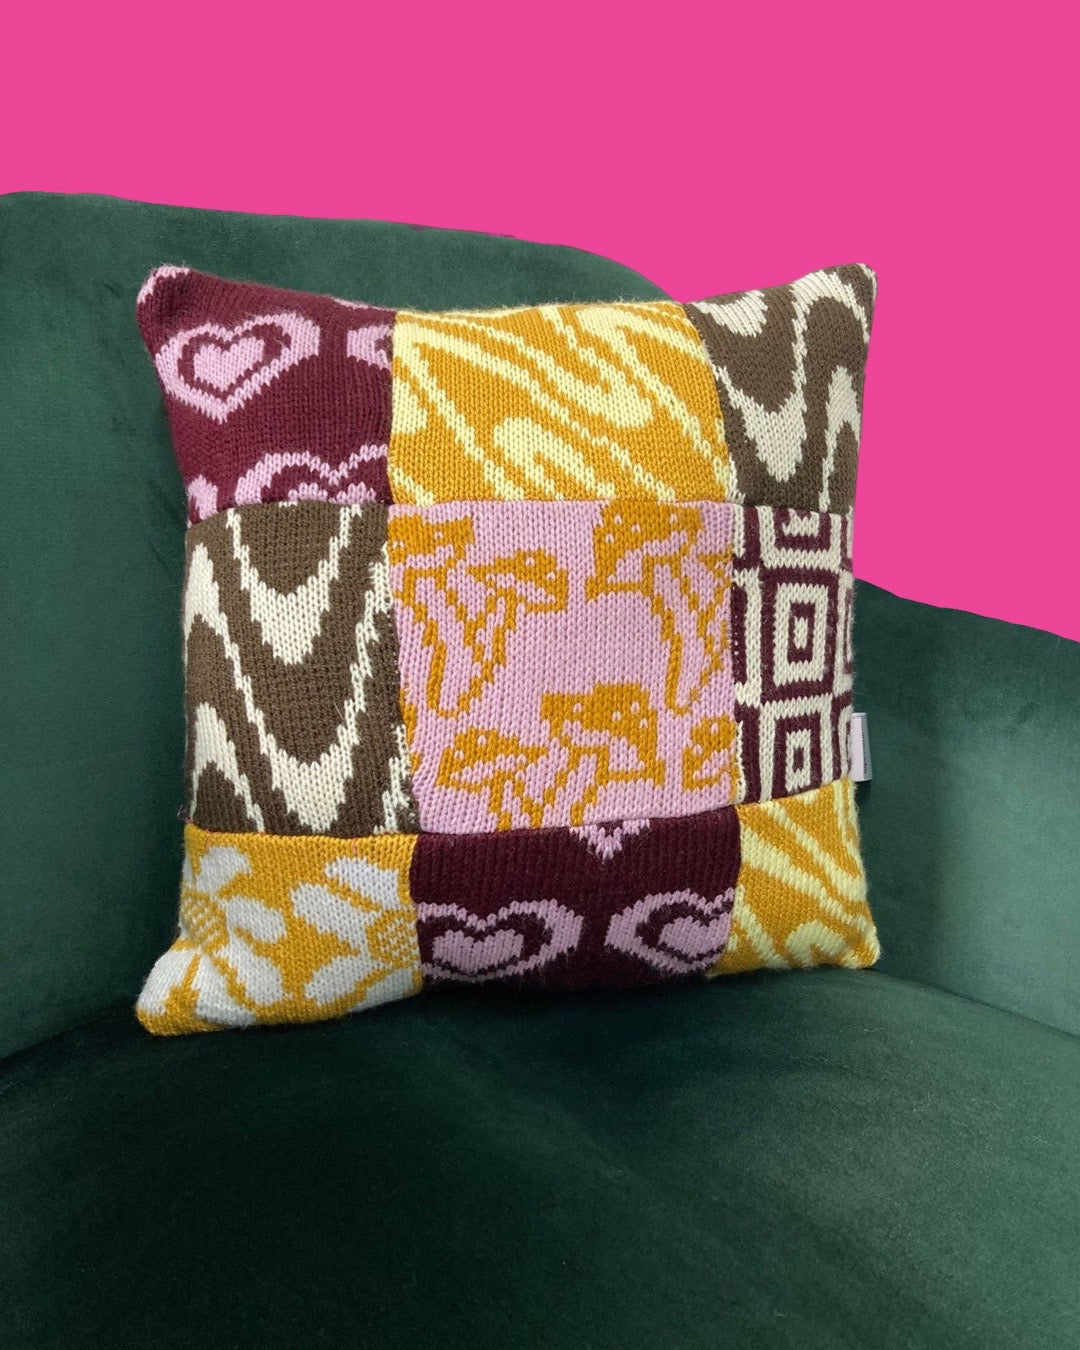 Medium Zero Waste Patchwork Cushion - Yellows and Browns - READY TO SHIP